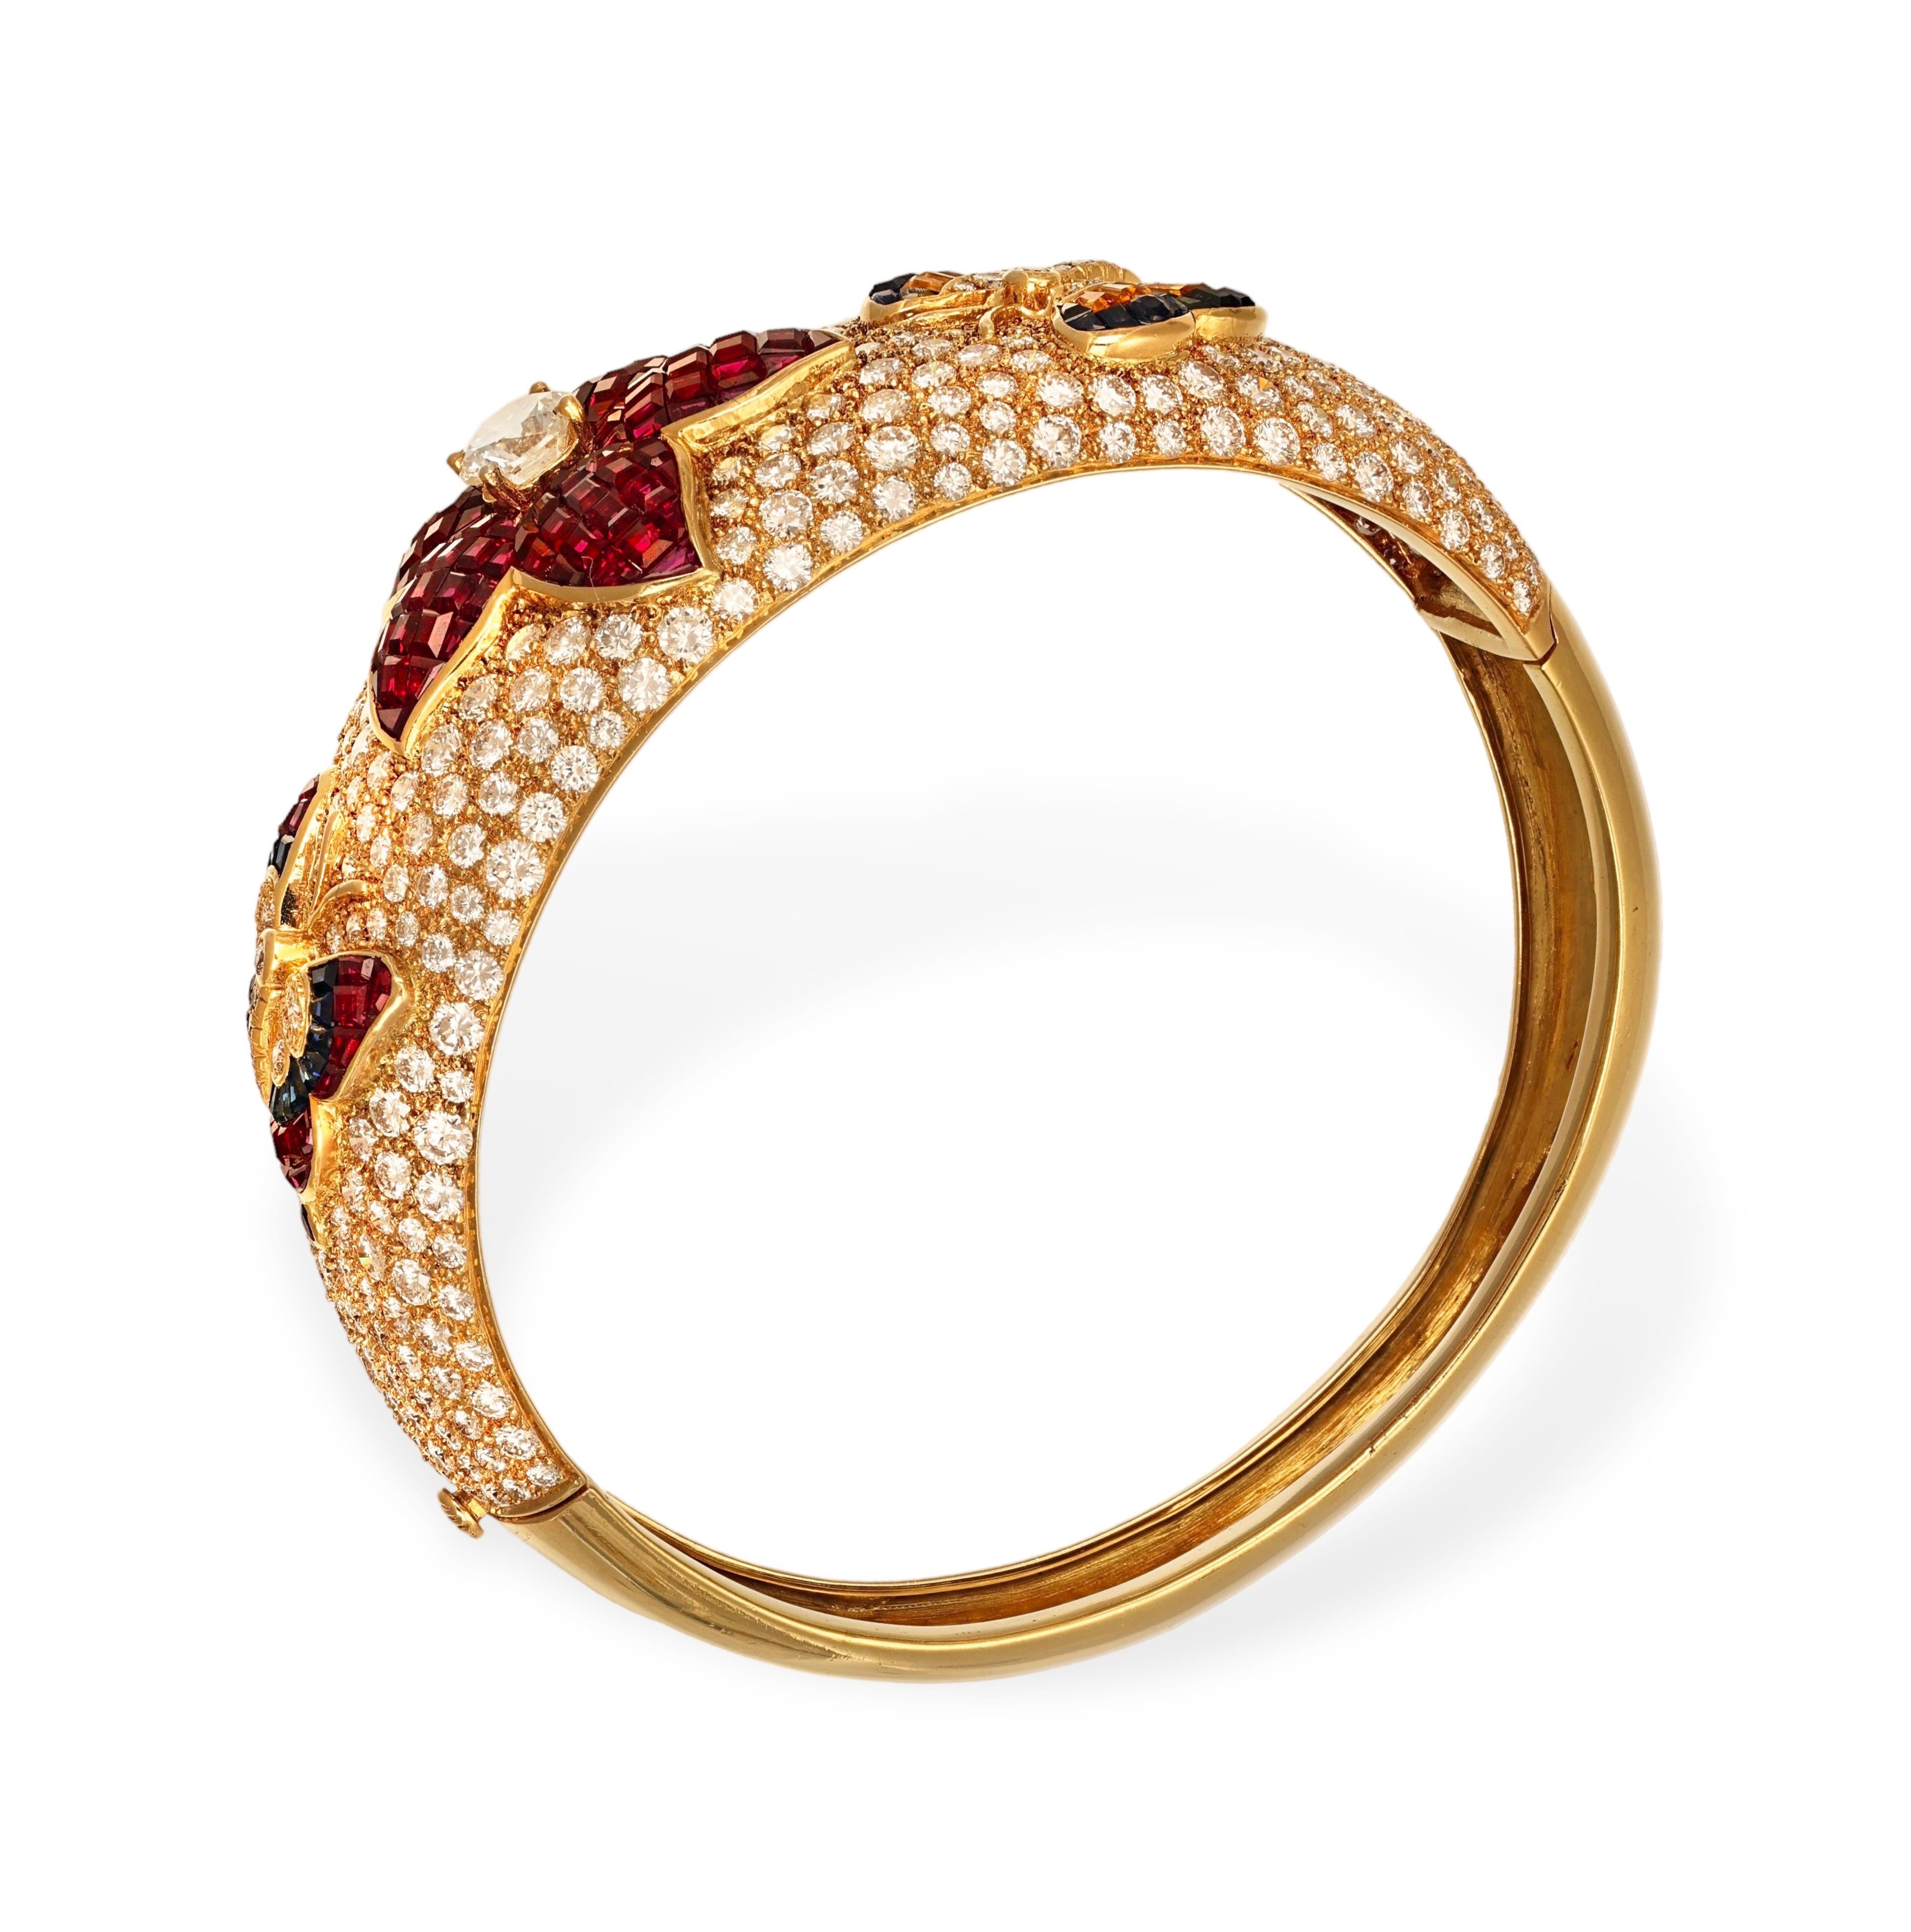 18 kt. Yellow Gold Wide Bangle Bracelet With Diamonds, Rubies, Sapphires For Sale 4